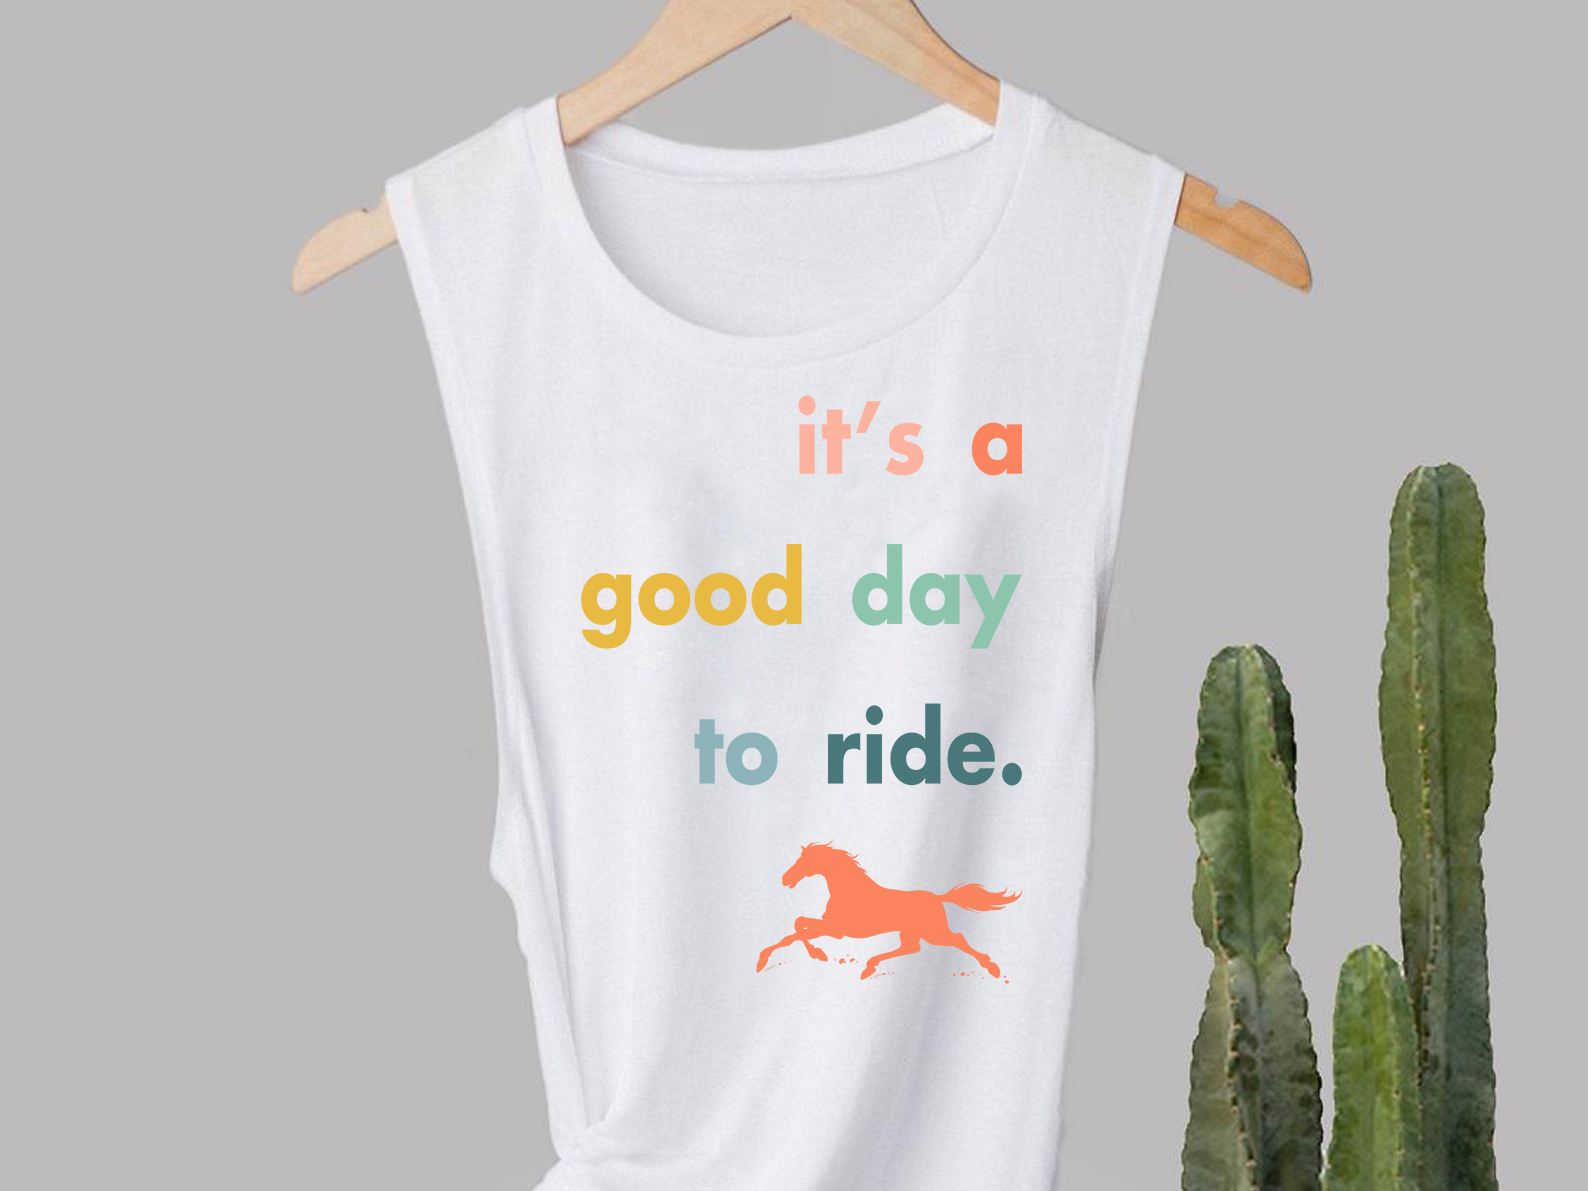 It's a good day to ride - Ride a horse